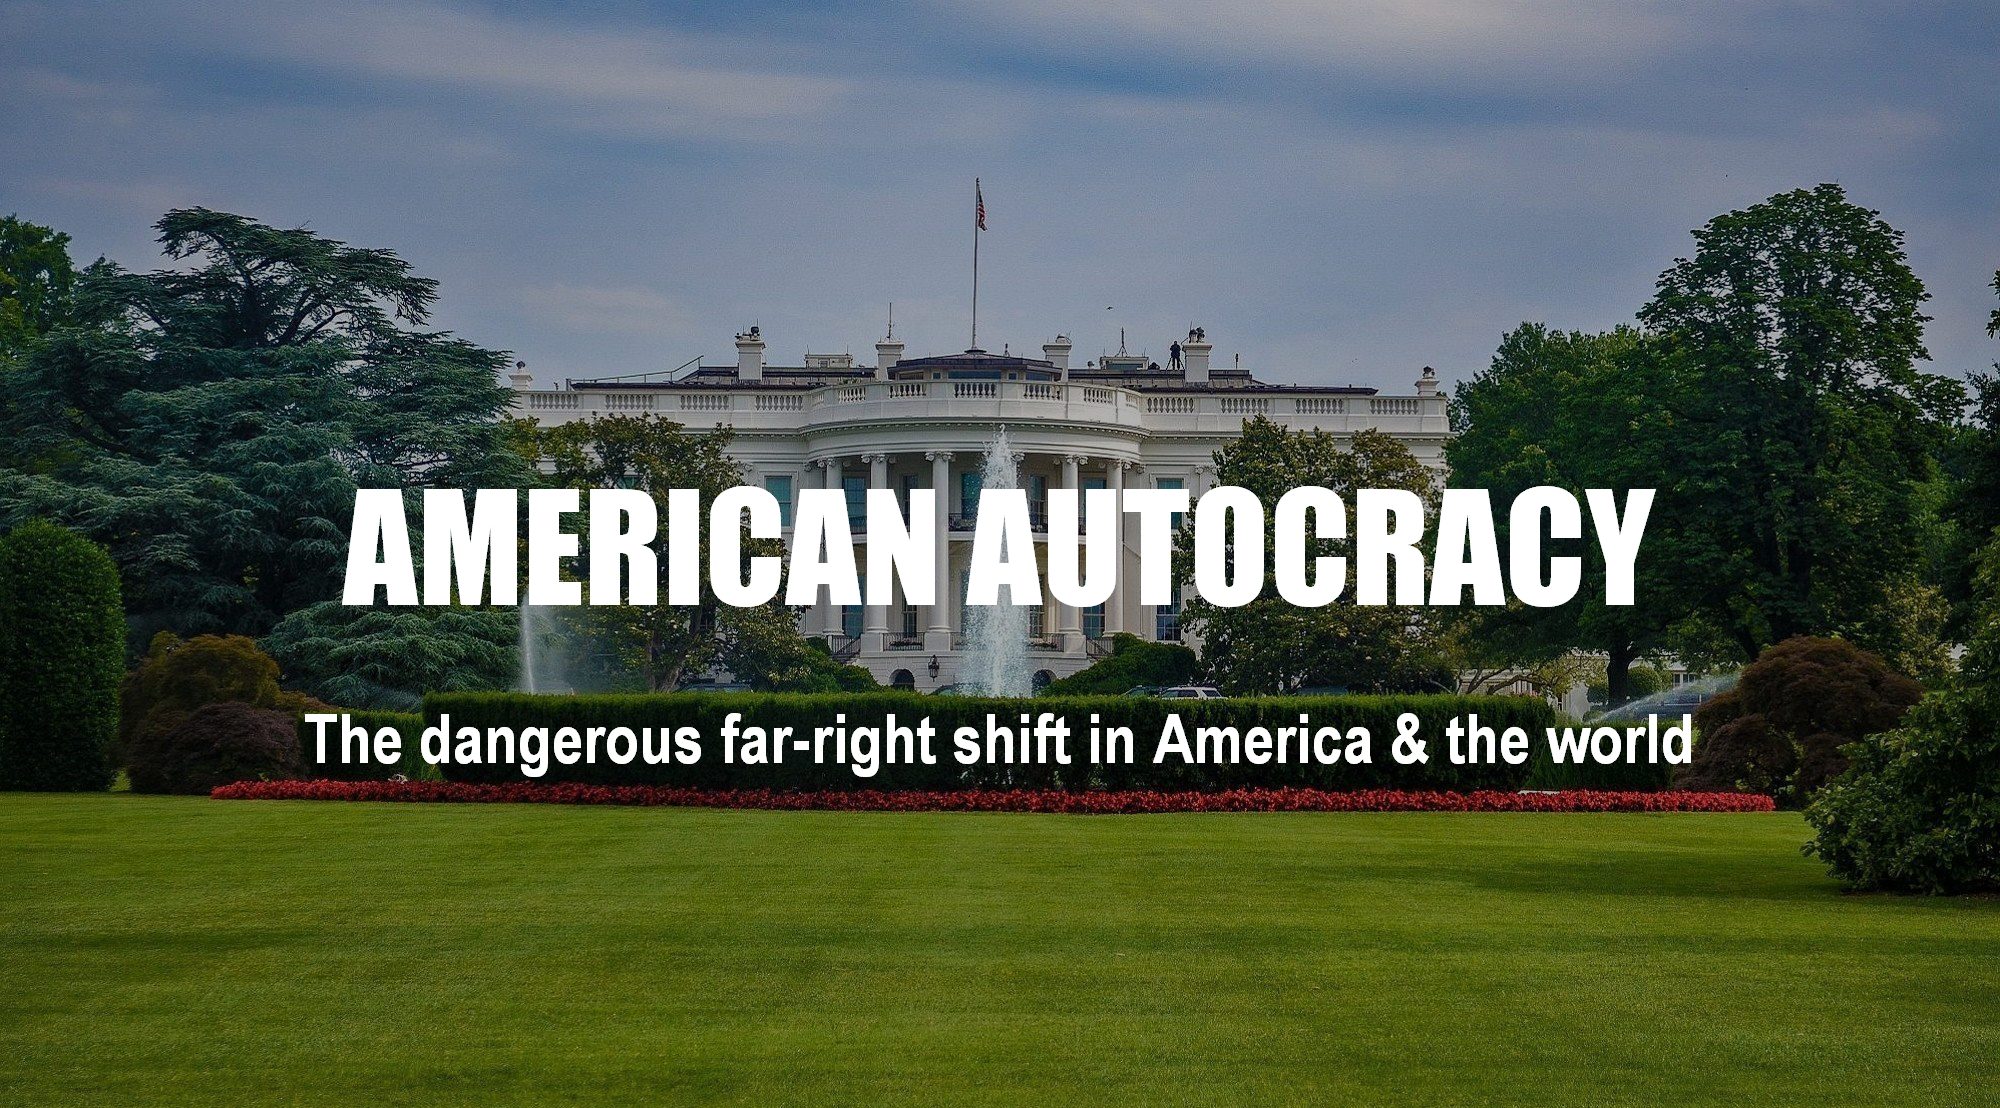 Will America become an autocracy? Will America turn into a radical far-right nation?